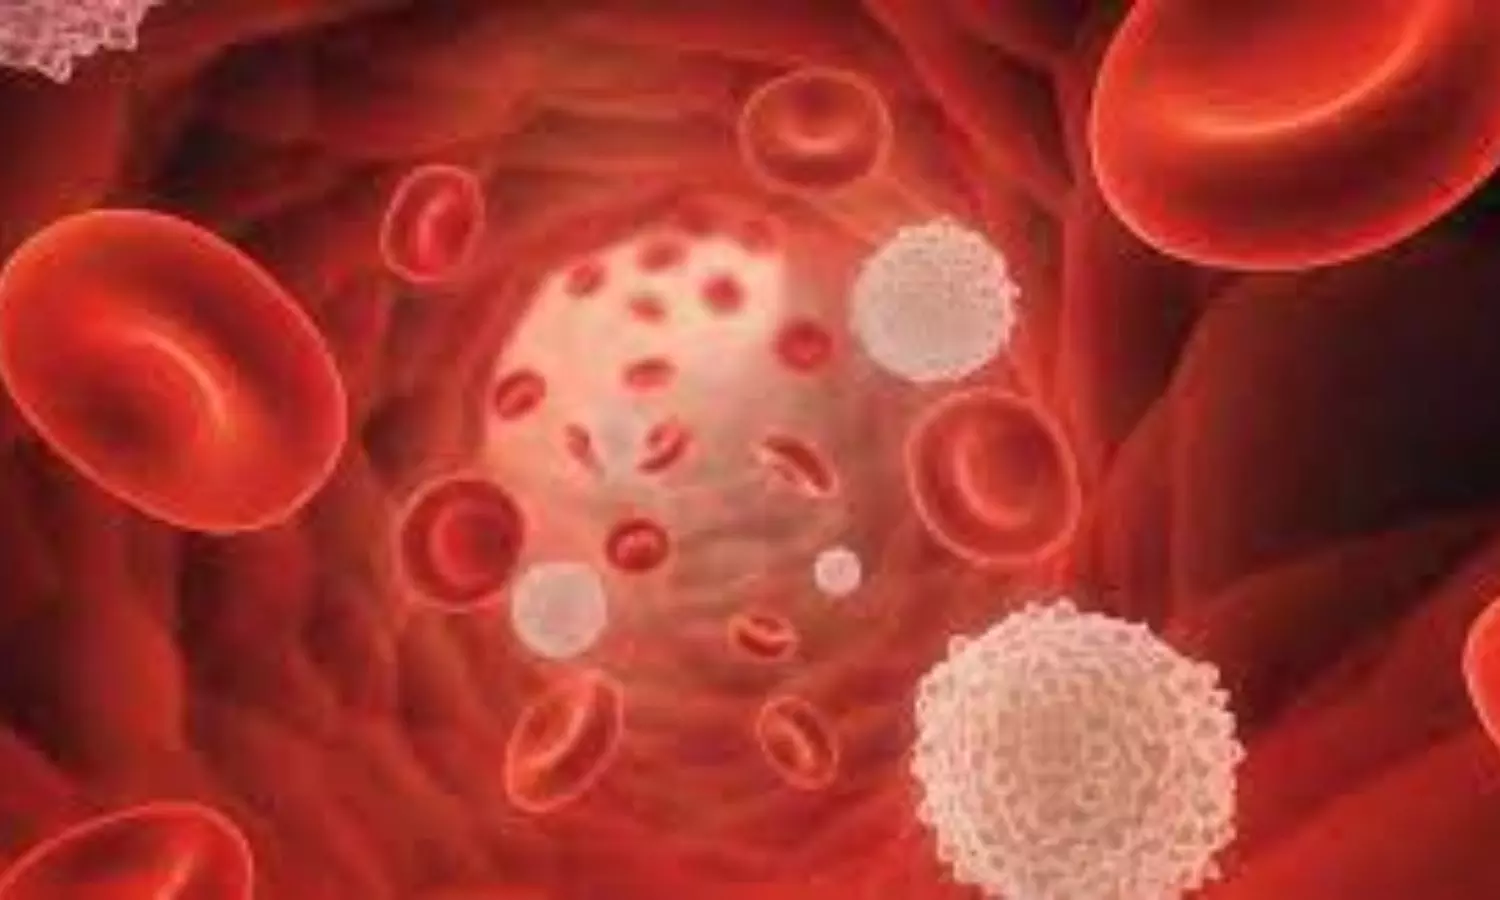 Prophylactic platelet transfusion lowers bleeding risk before CVC placement among severe thrombocytopenia patients: NEJM